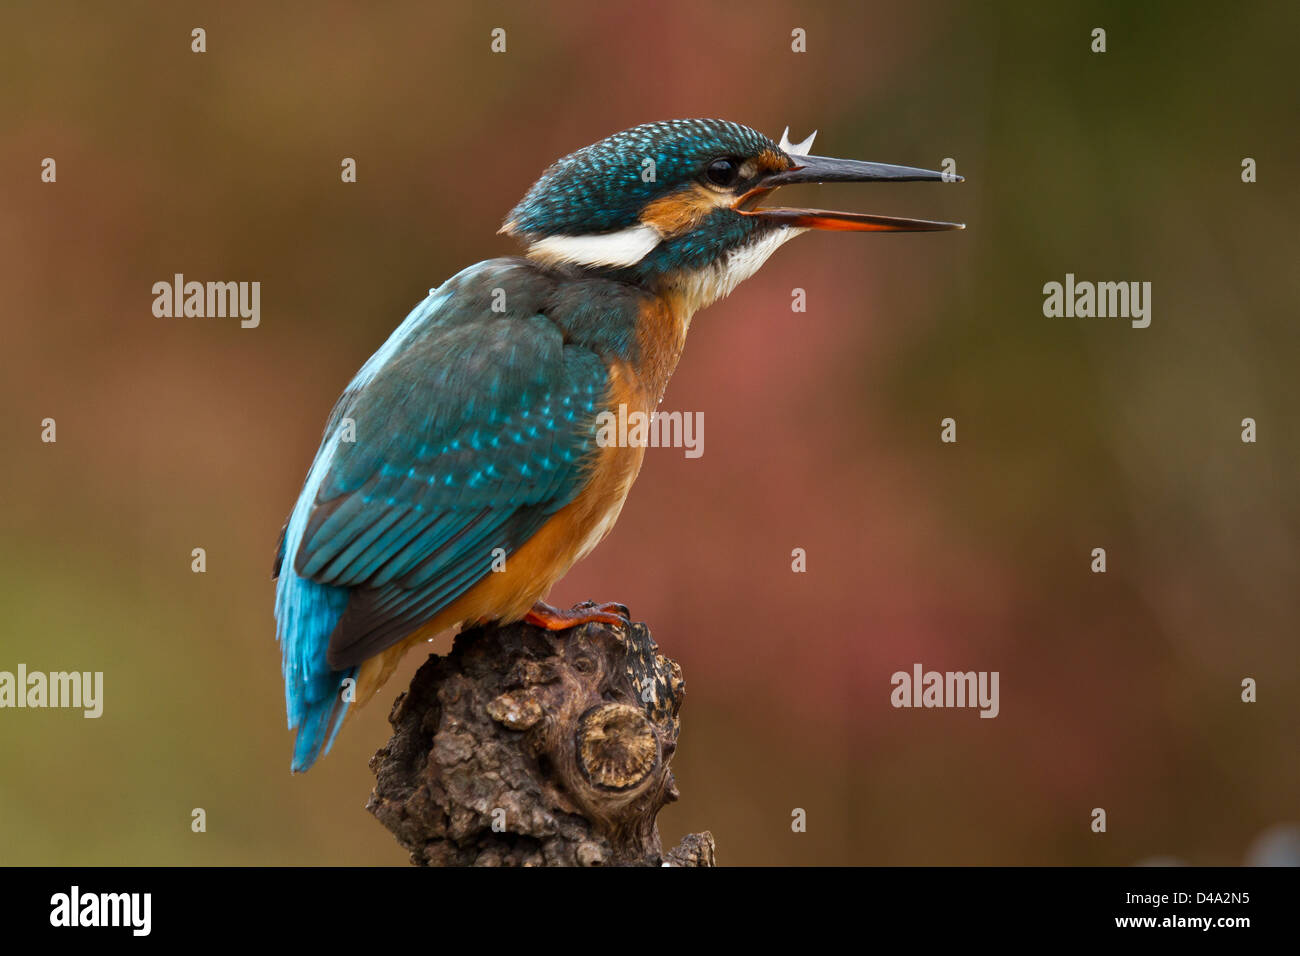 A Kingfisher sitting and eating on his perch a fish Stock Photo